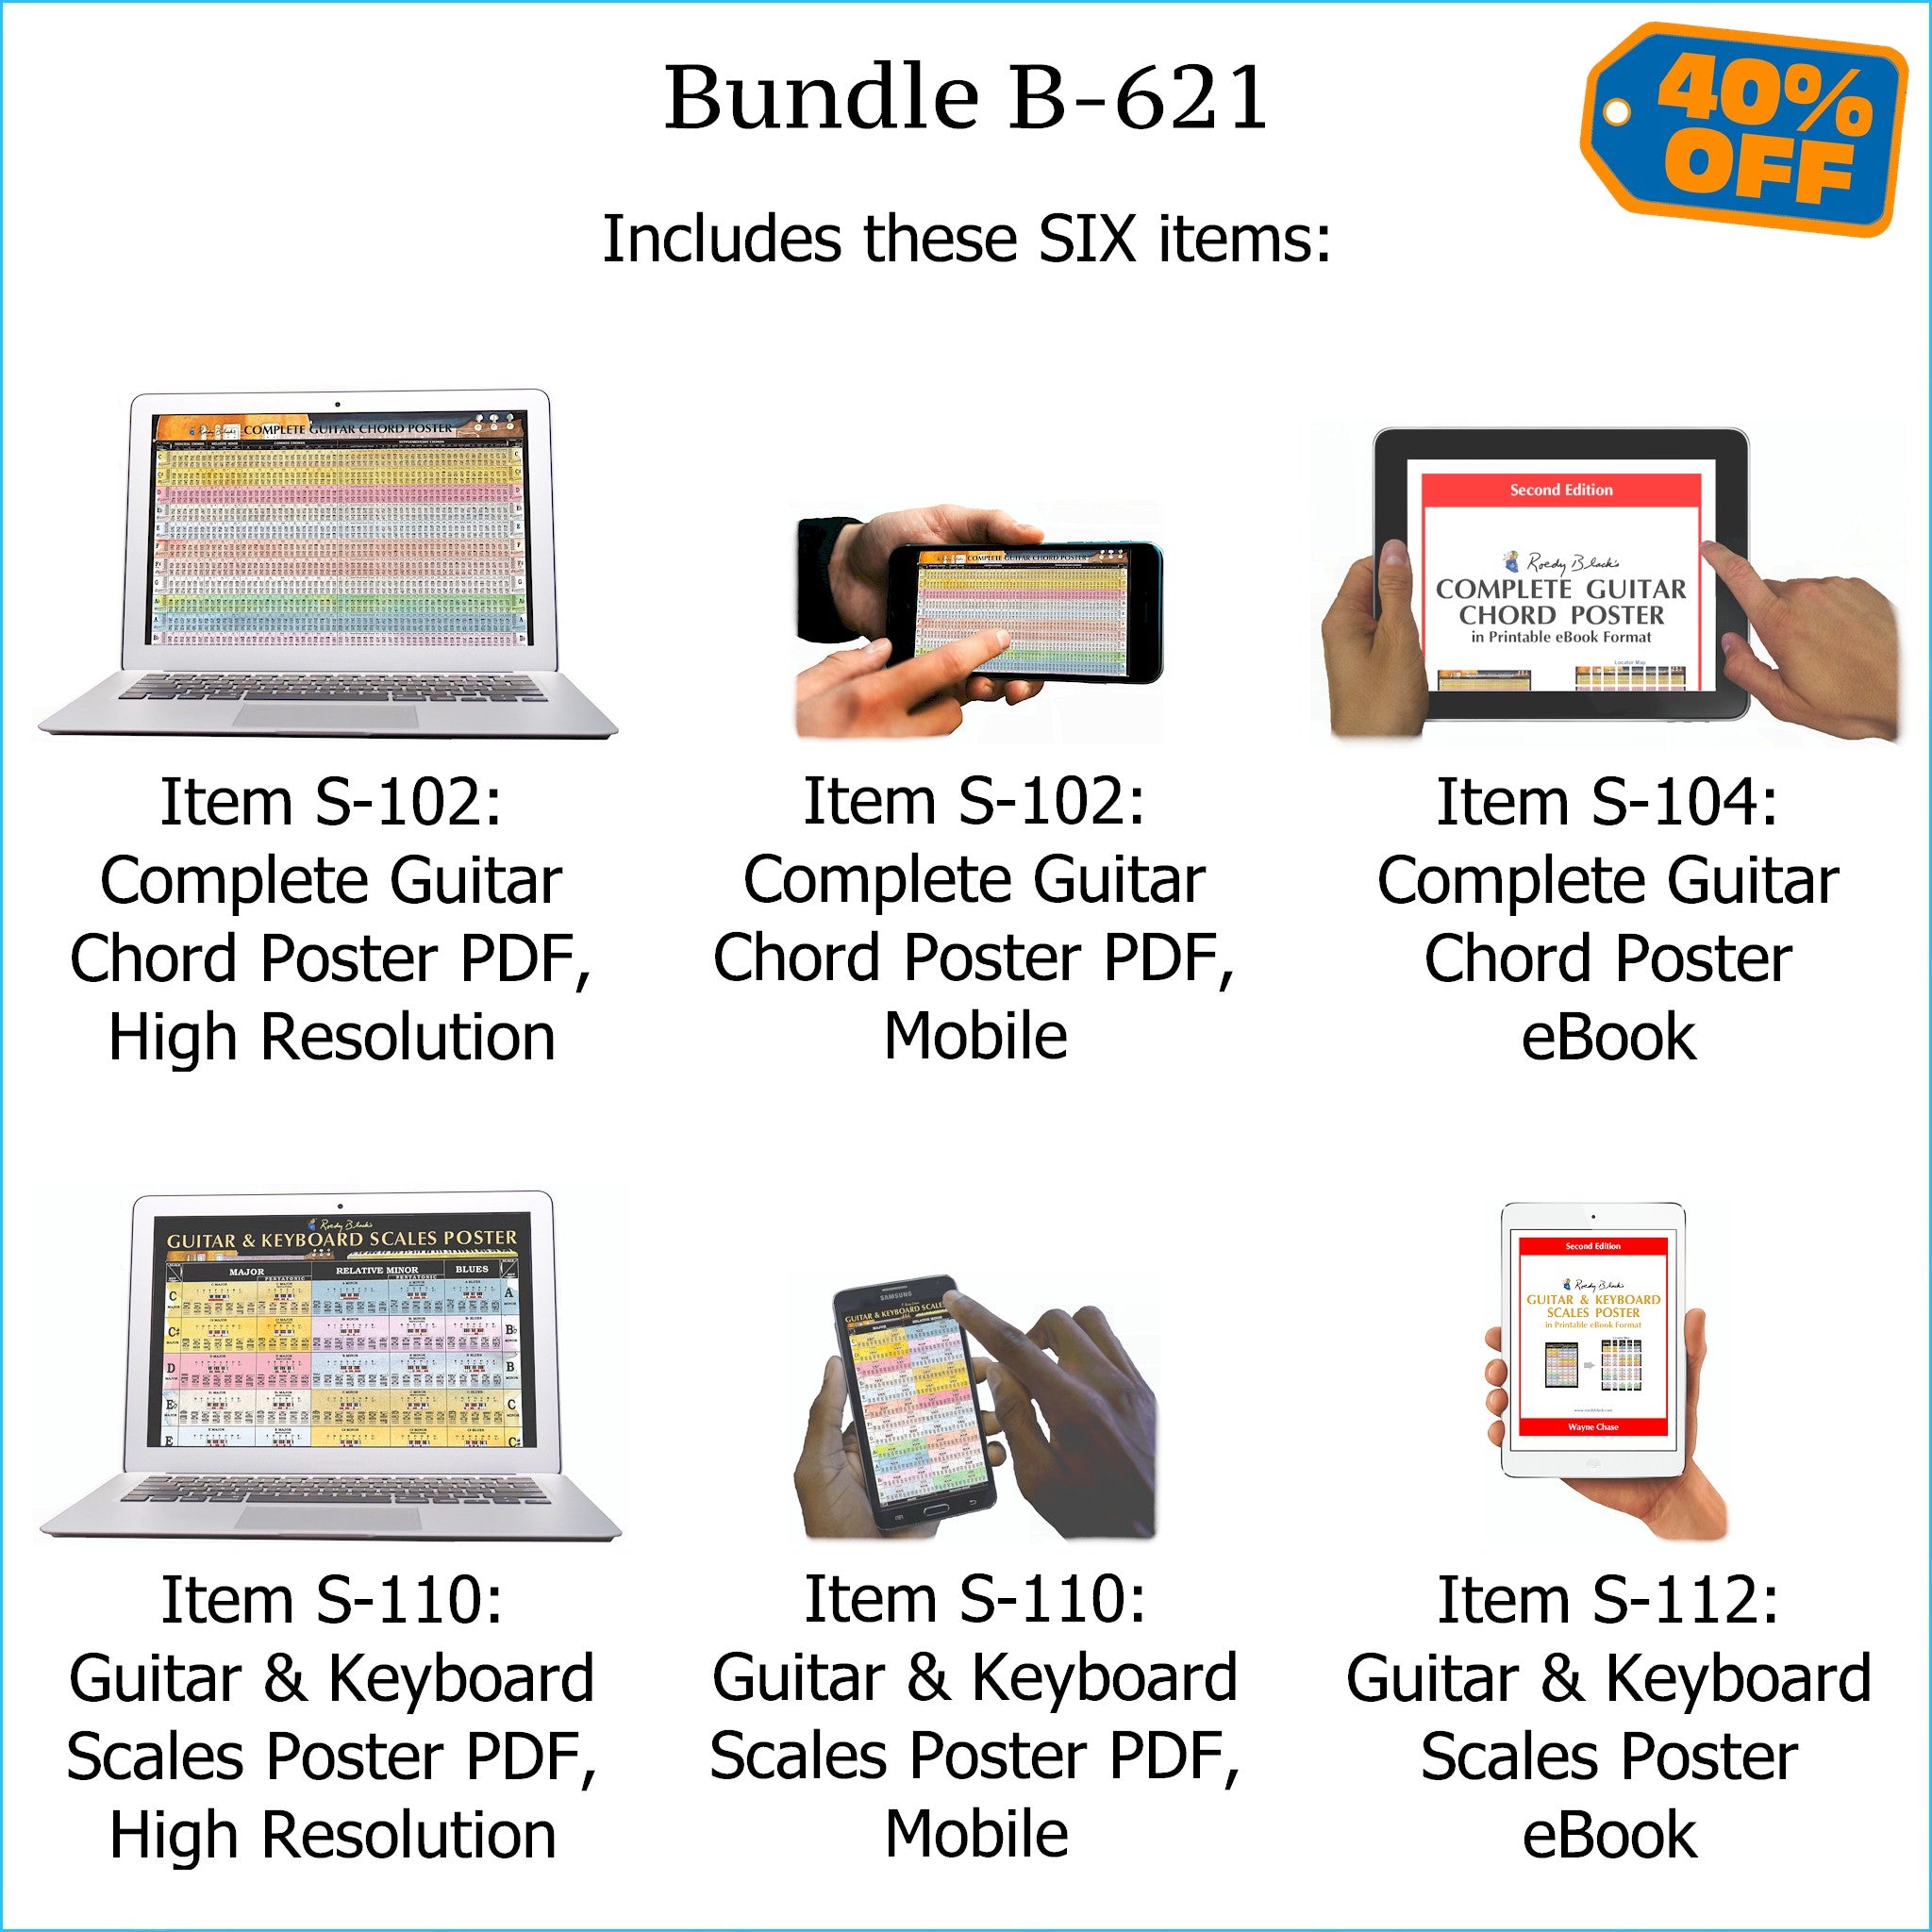 Bundle B-621 (SIX Items): Includes PRINTABLE "Complete Guitar Chord Poster" and "Guitar & Keyboard Scales Poster". High Resolution E-Posters for Smartphone / Tablet / Computer, and High Resolution PRINTABLE E-Books. FREE Download Protection.